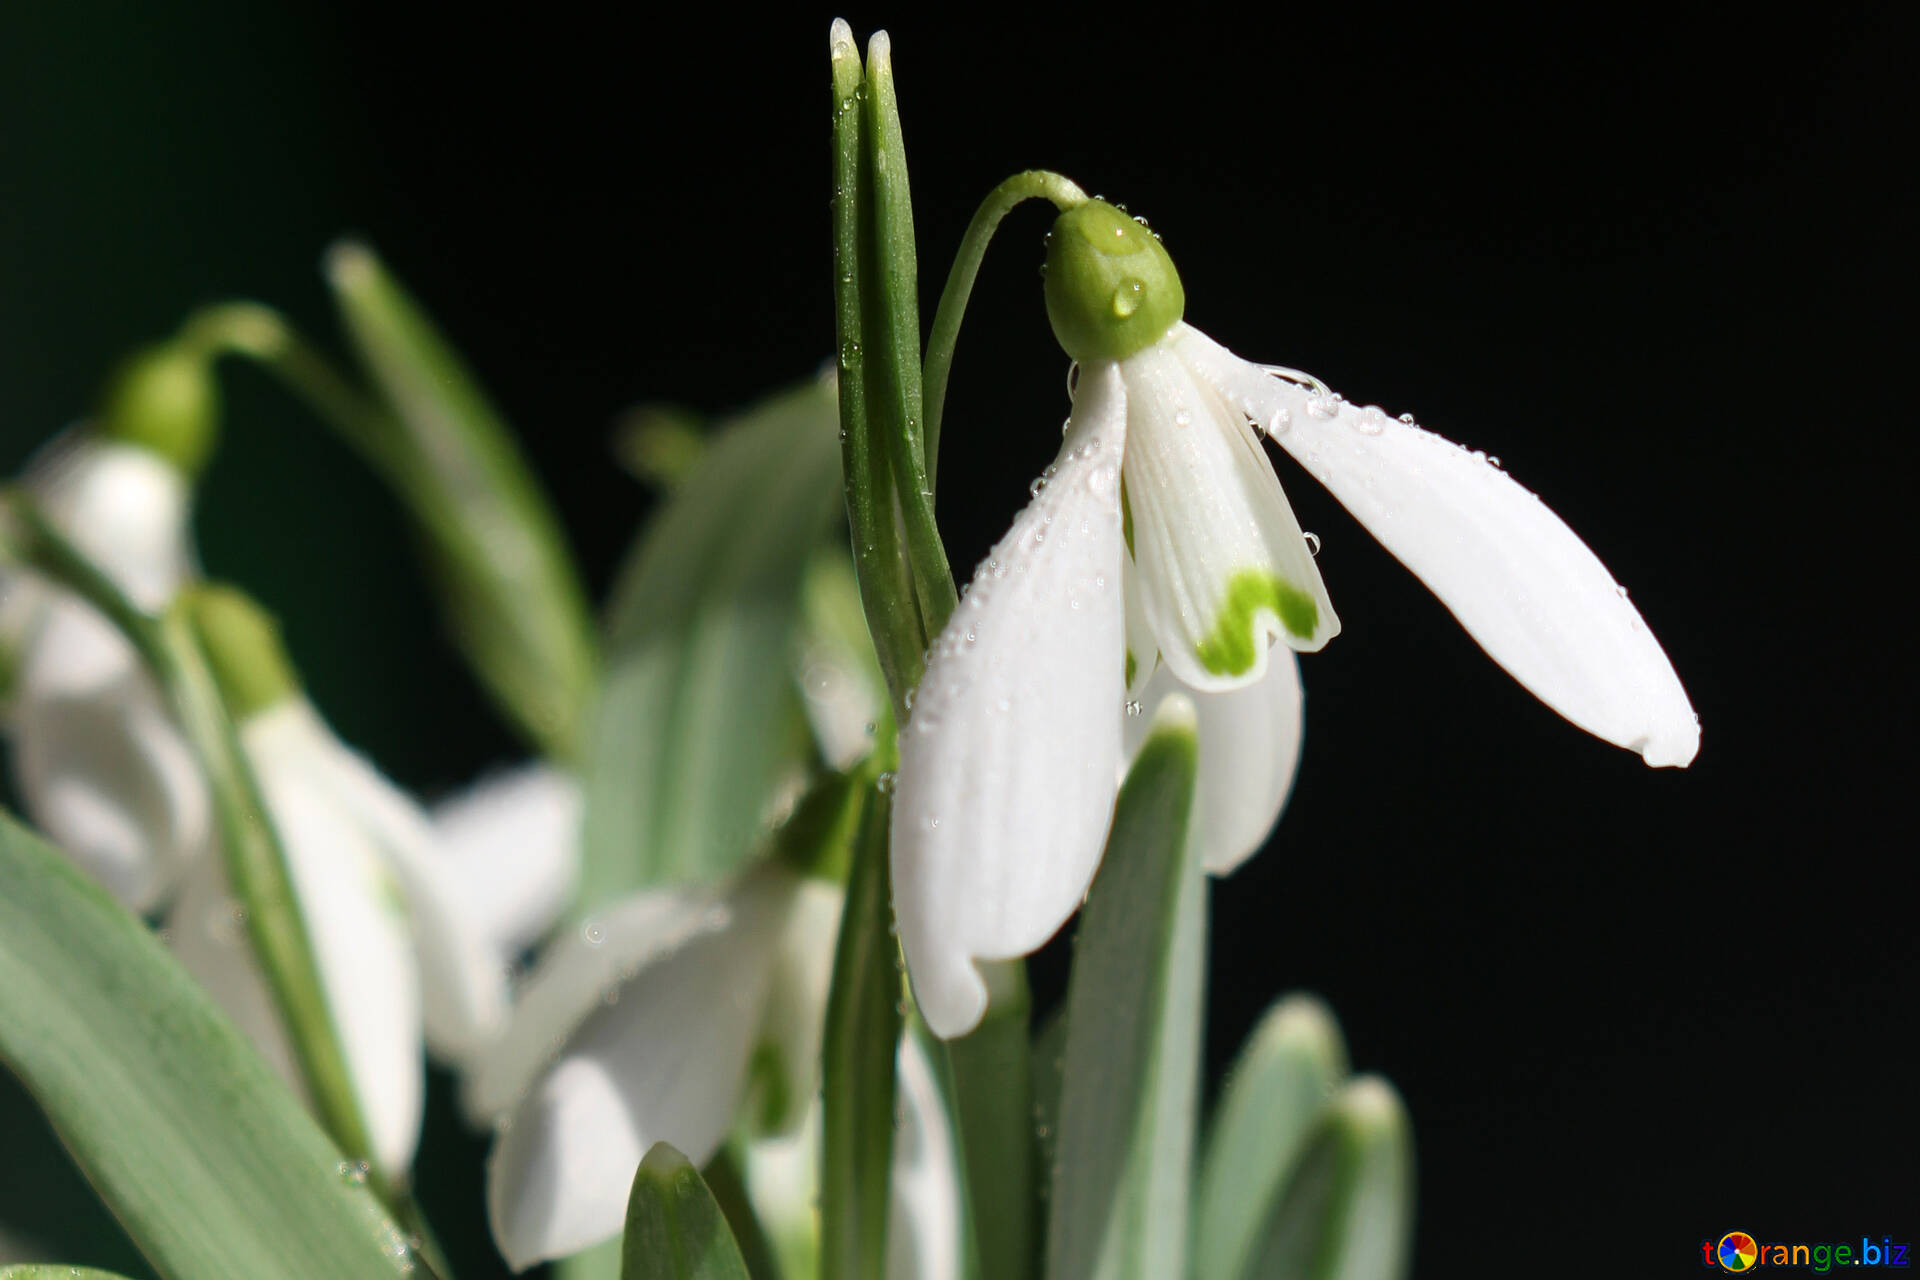 Flowers Snowdrops Desktop Wallpaper Image Delicate Flowers Image Desktop Wallpaper № 38298. Torange.biz Free Pics On Cc By License